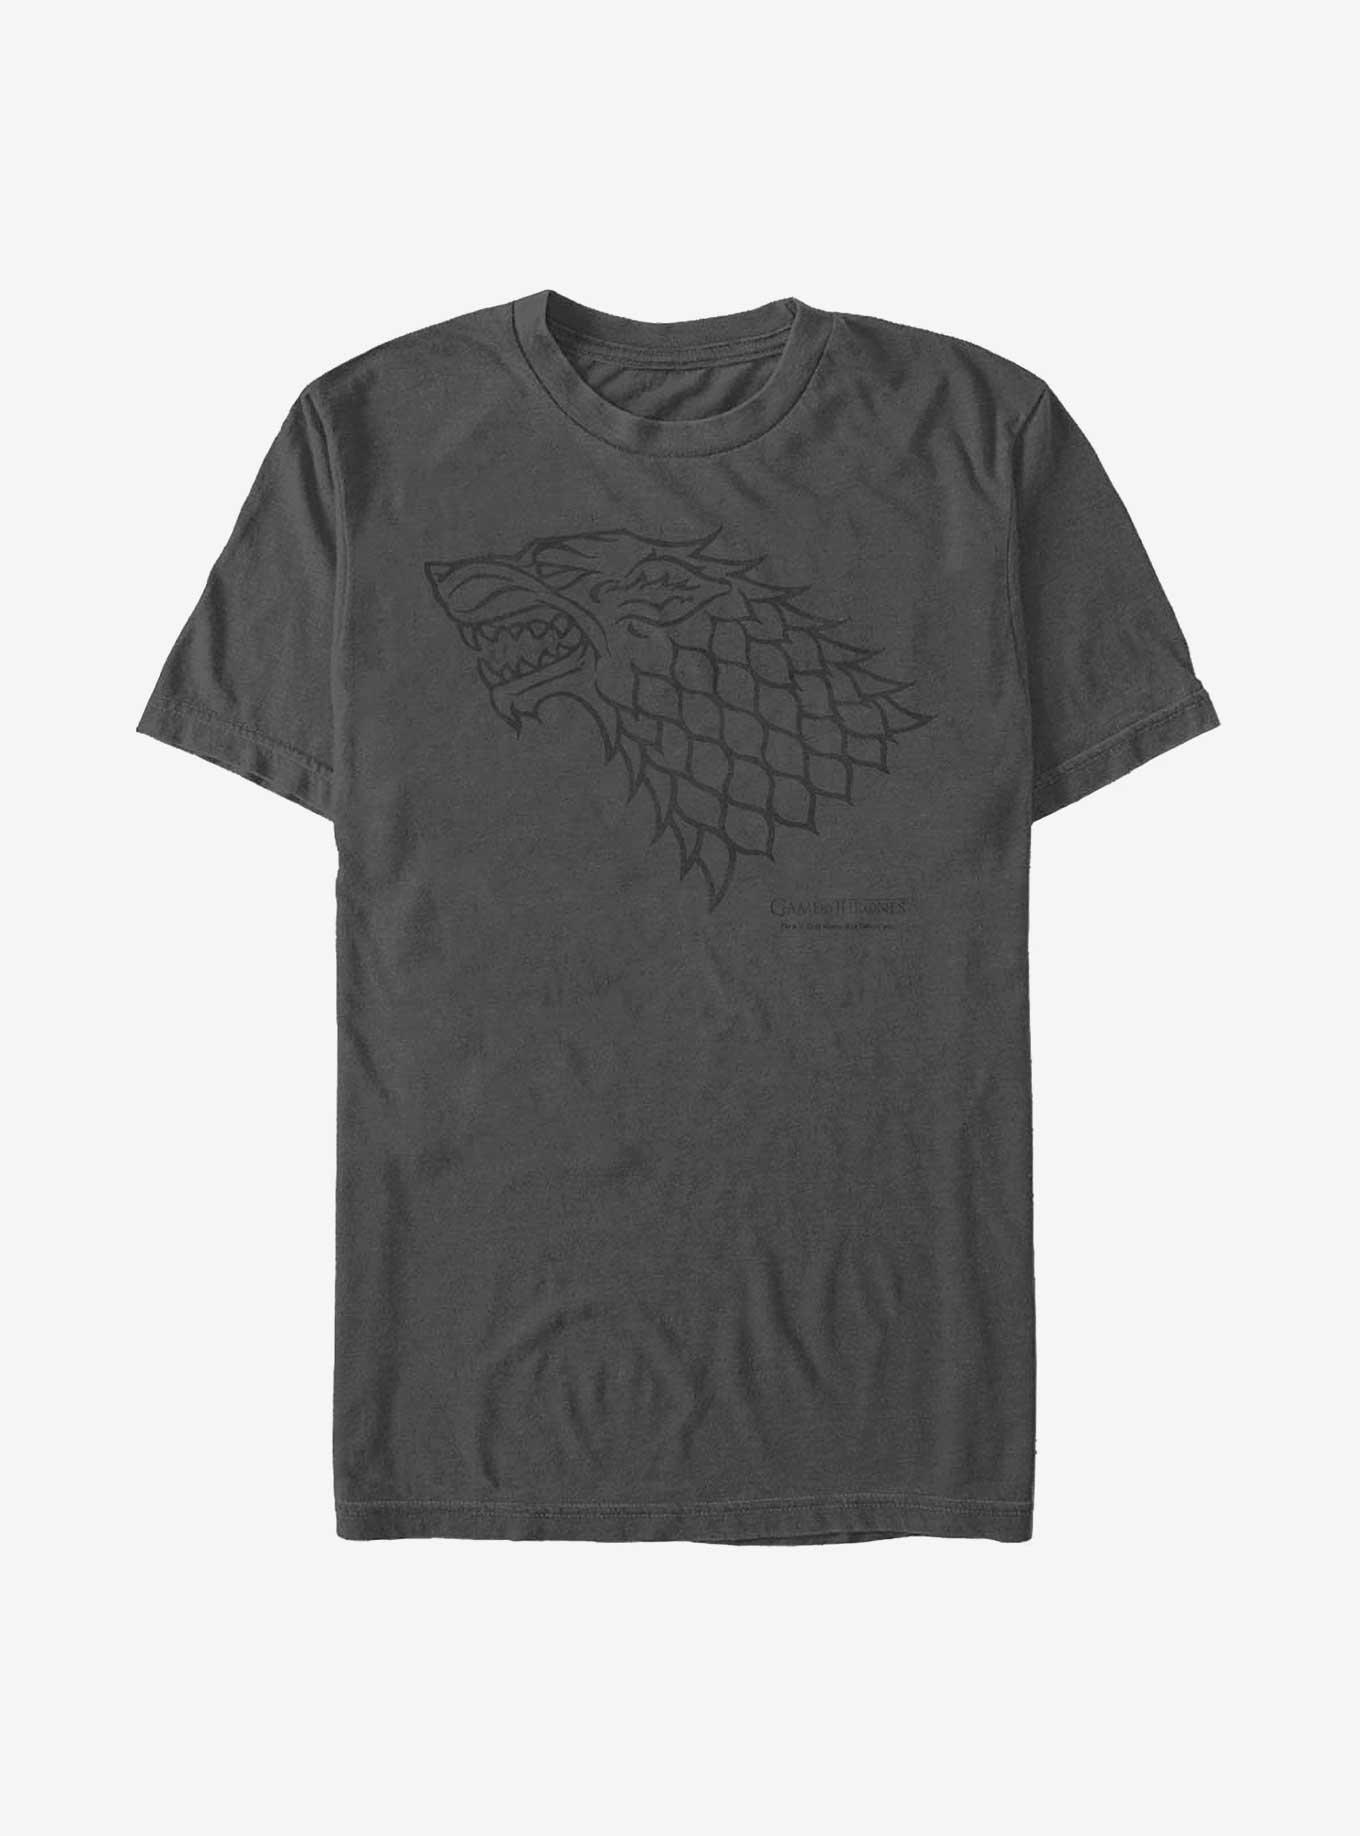 Game Of Thrones House Stark T-Shirt, CHARCOAL, hi-res